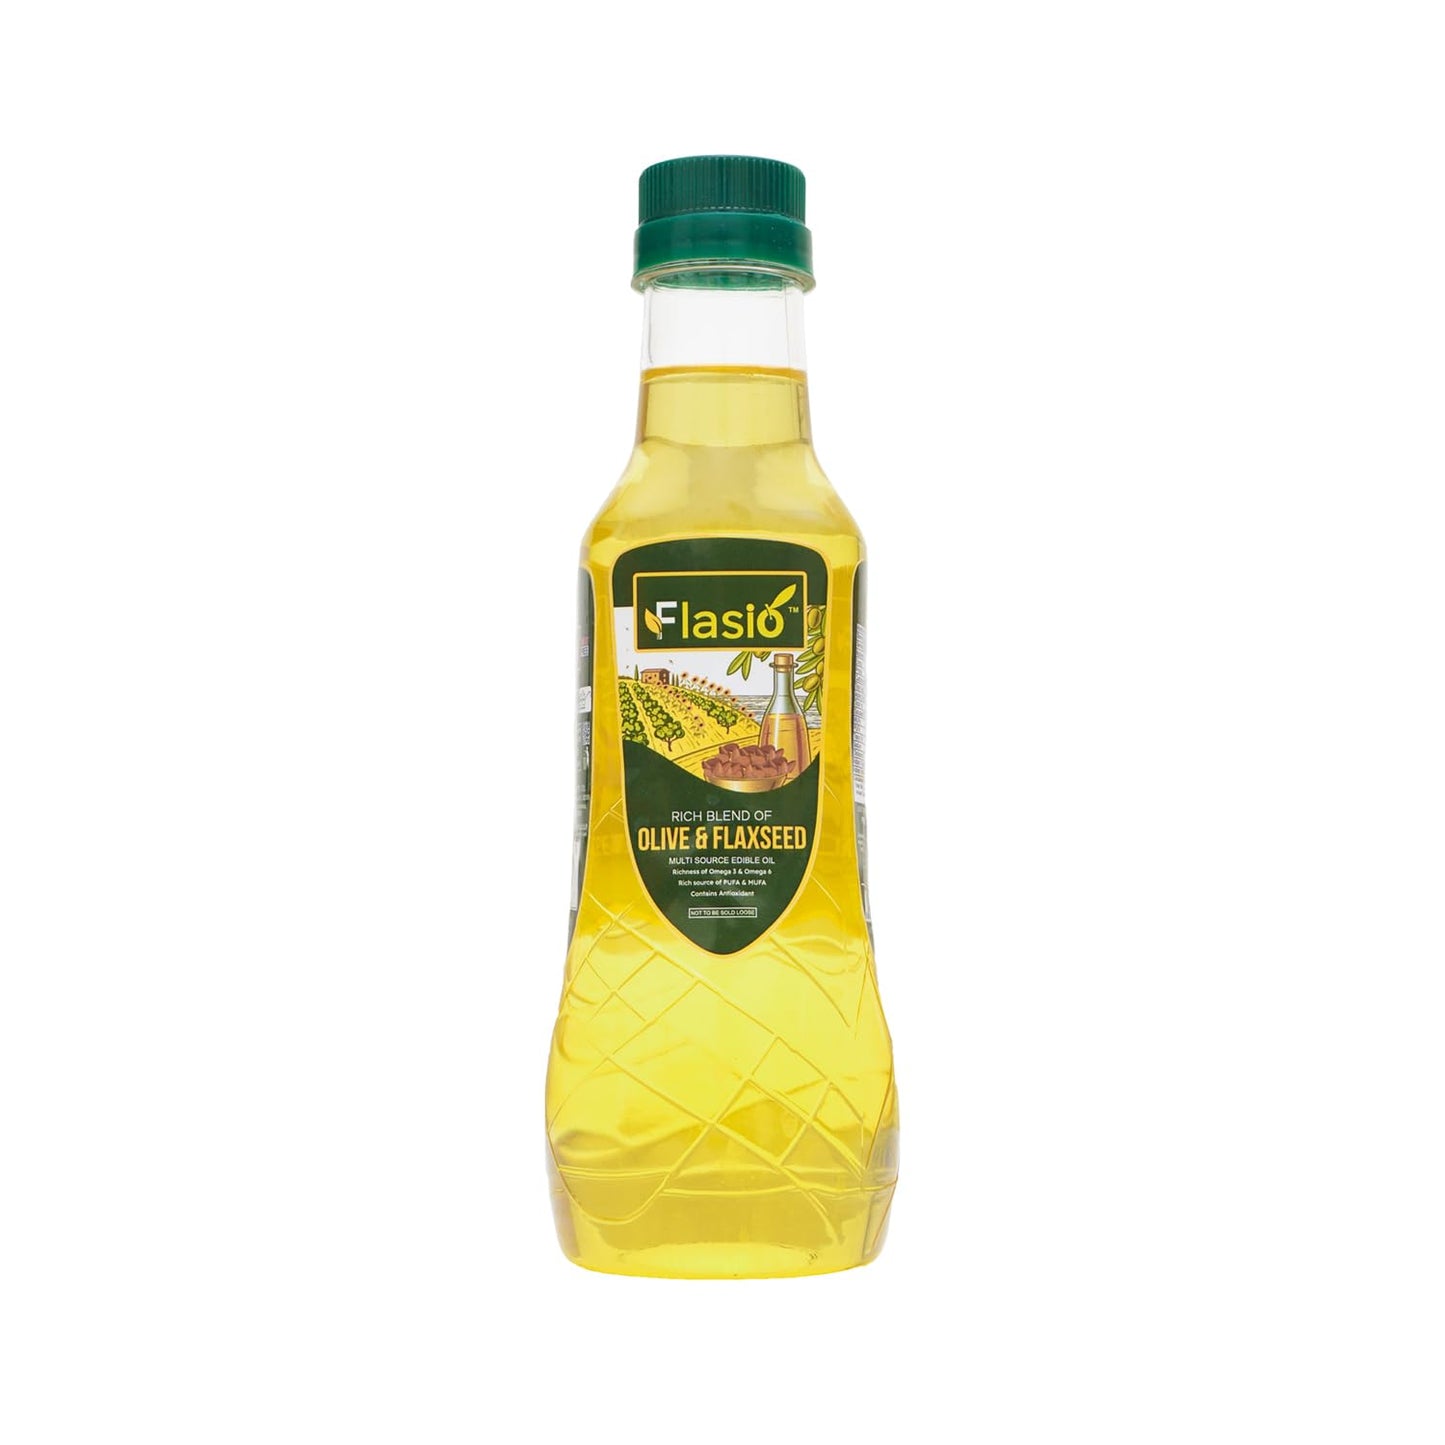 Flasio Rich Blend of Olive & Flaxseed Multi Source Edible Oil 1 Litre Pack